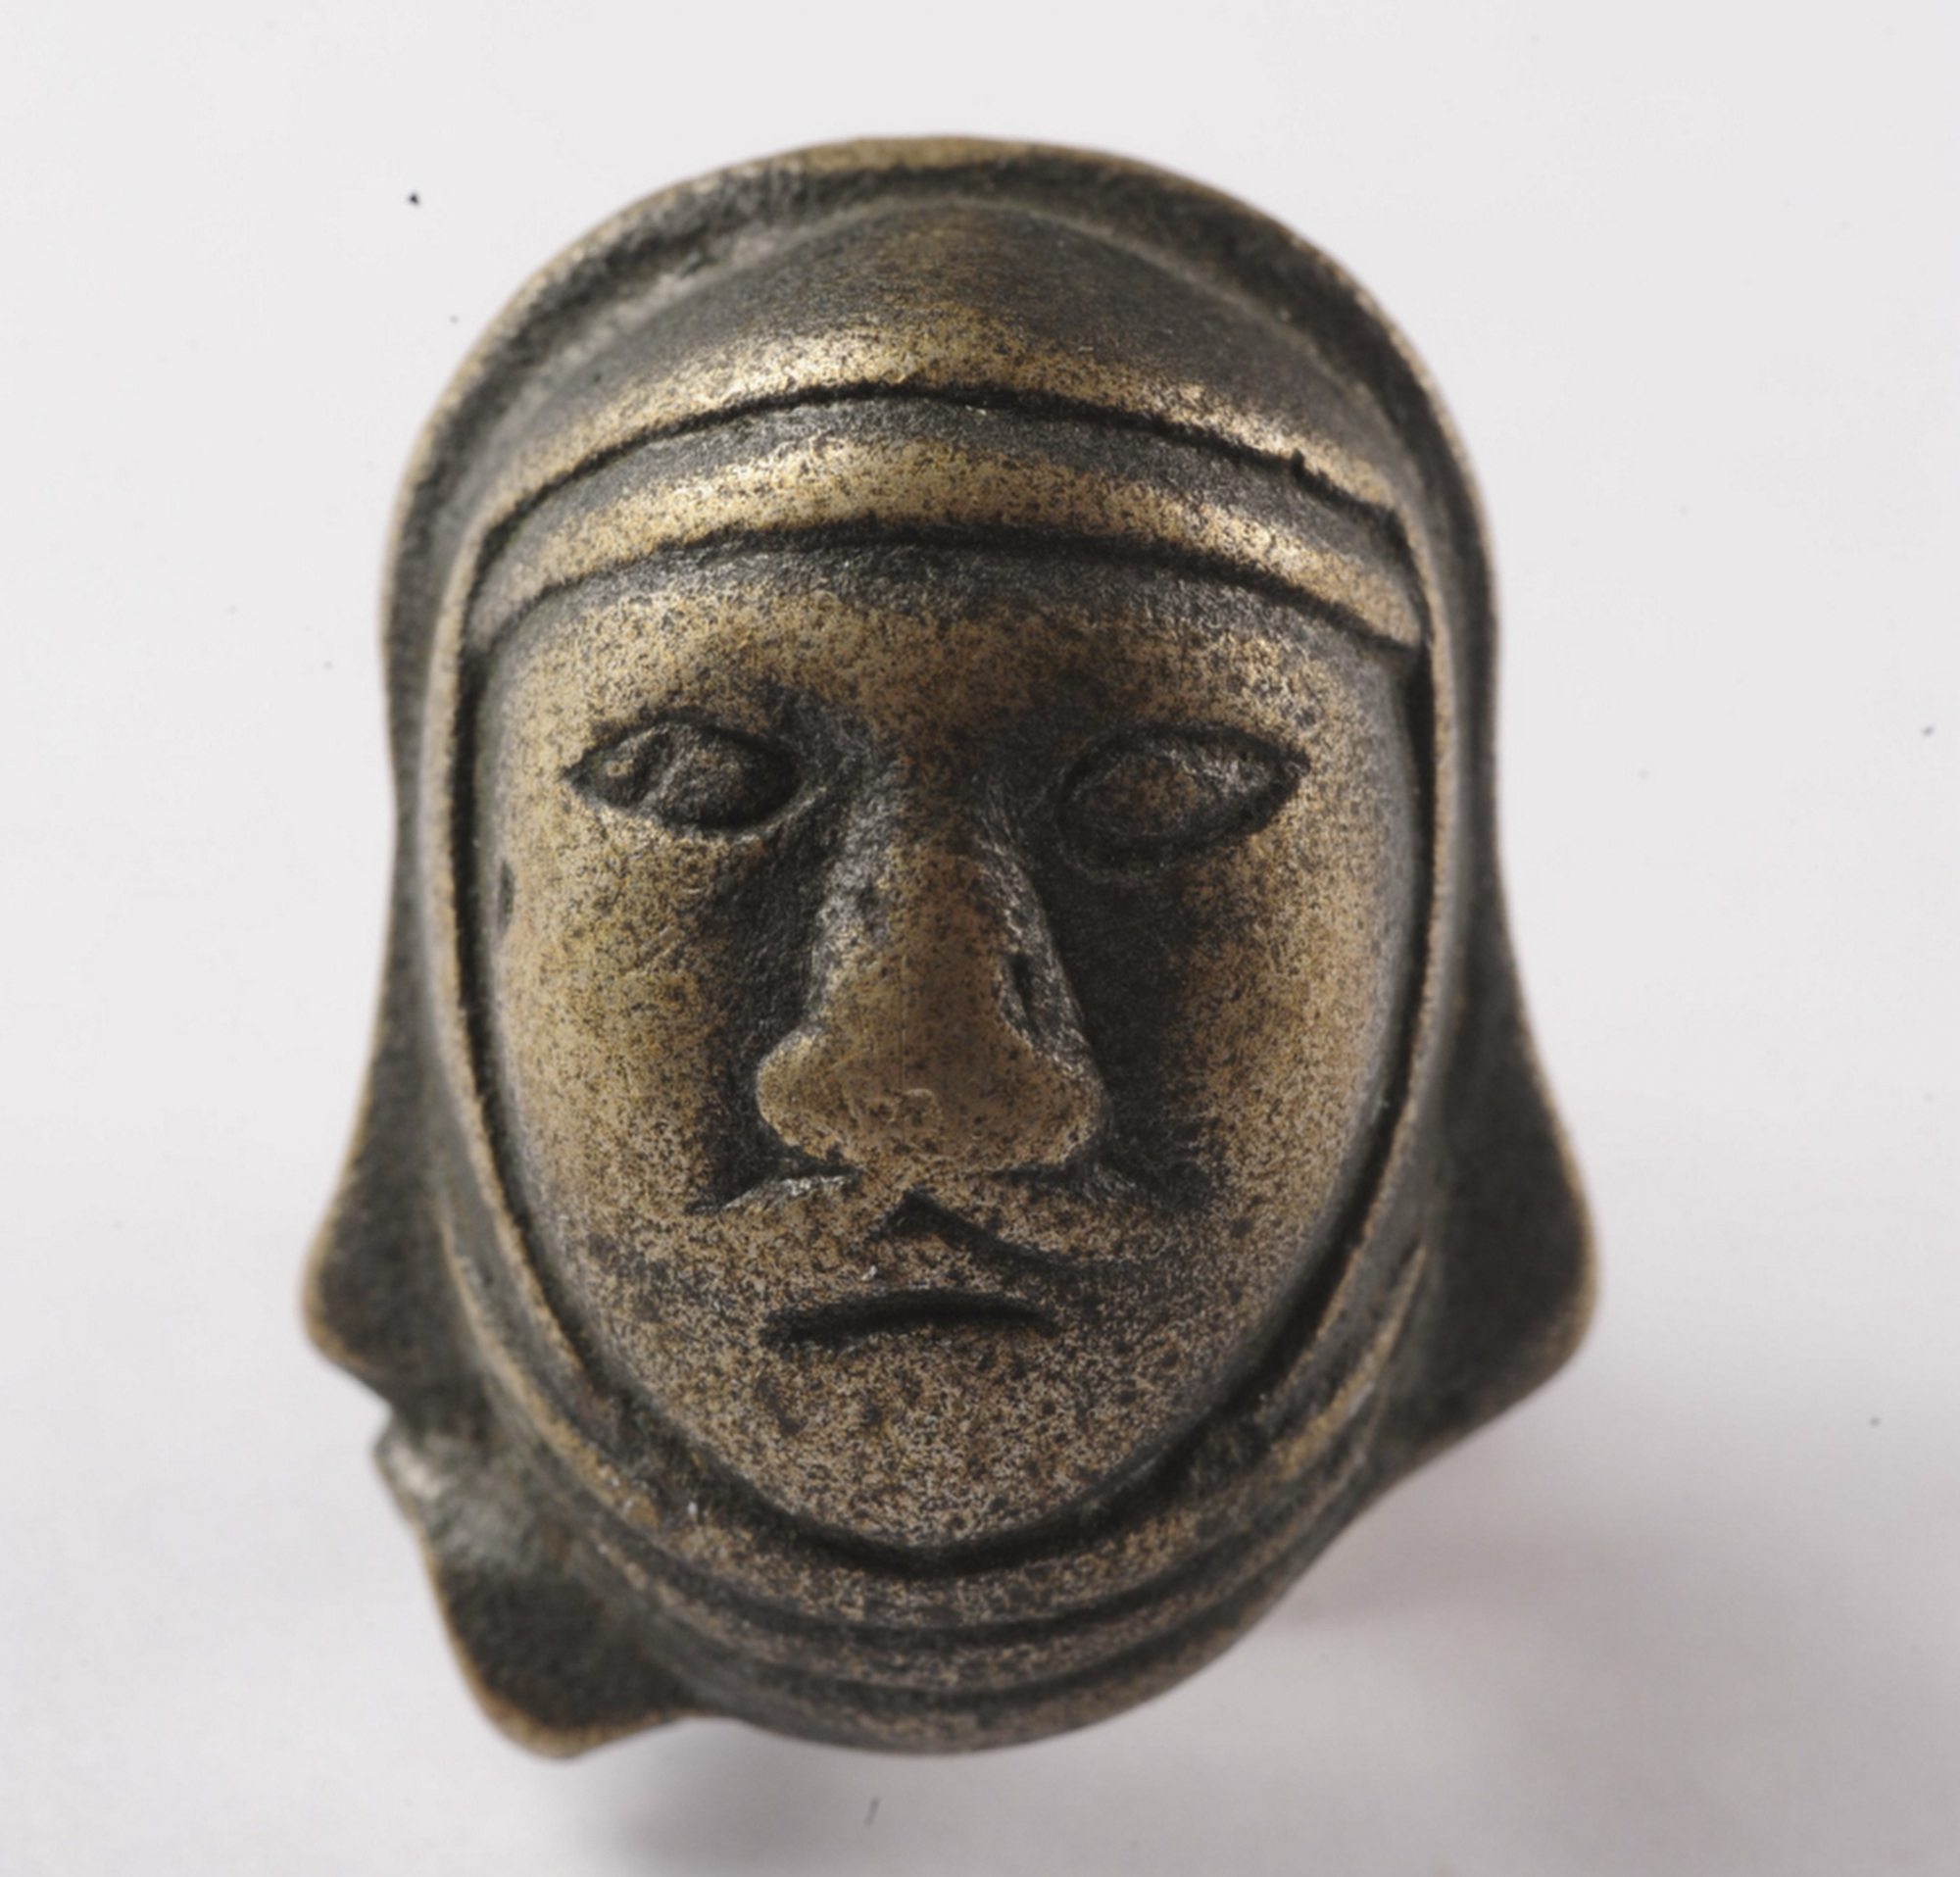 This handout image shows a object from "The Great Wall in 50 Objects," a bronze belt ornament depicting the face of a Xiongnu warrior. Photo / Courtesy of William Lindesay [03JANUARY2016 THE REVIEW BOOKS]